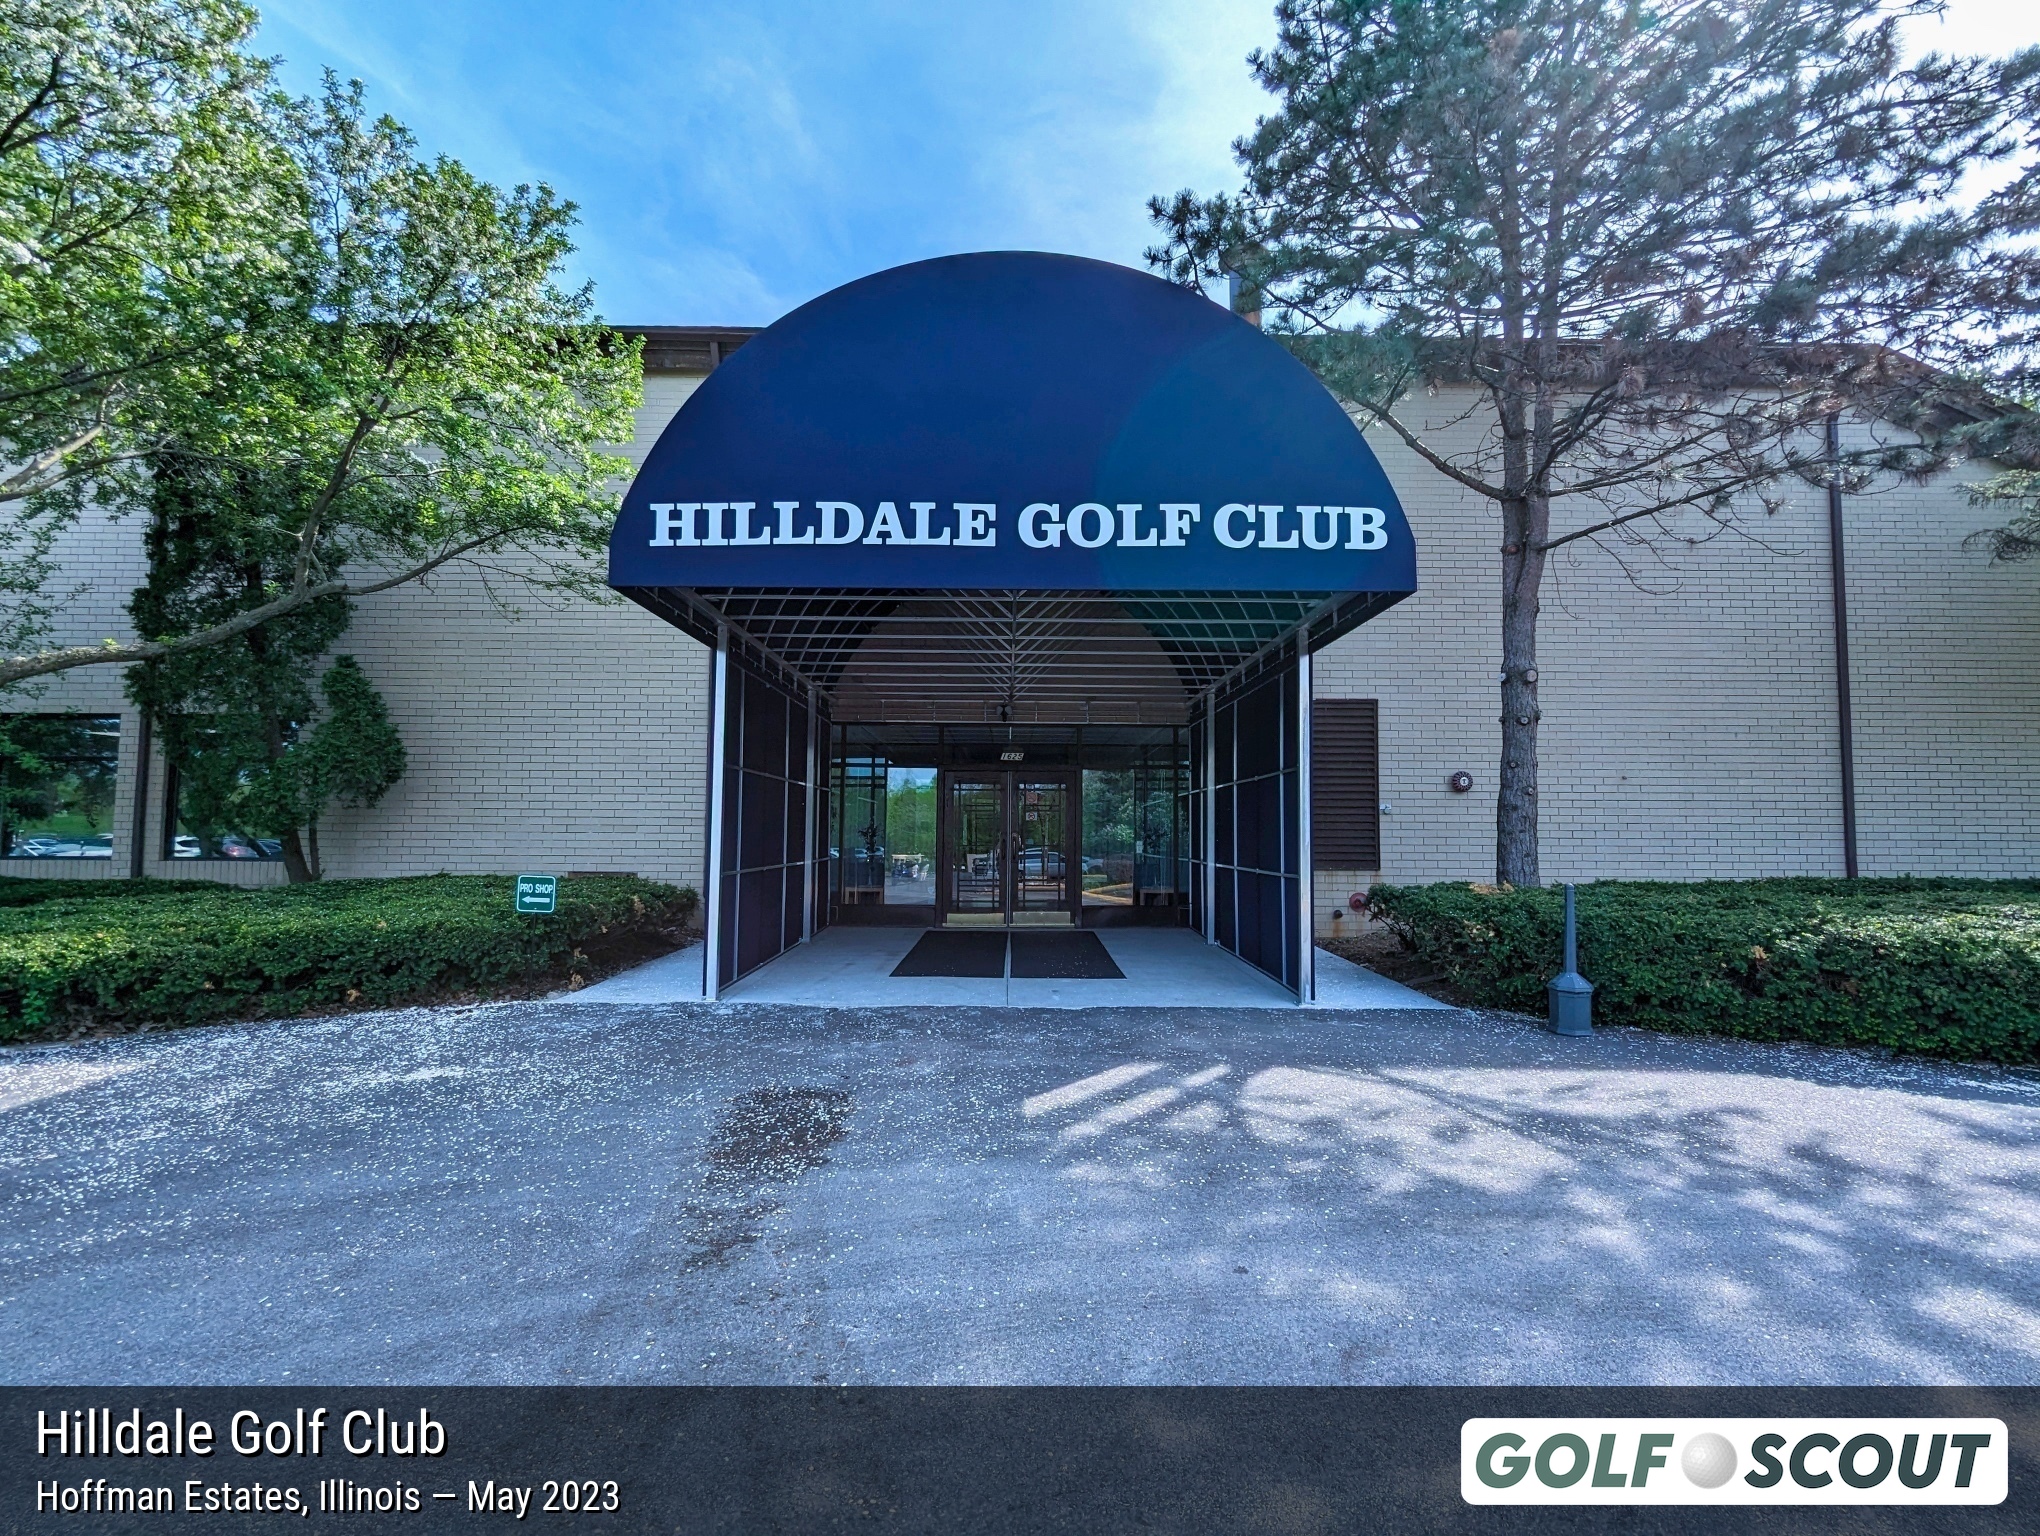 Miscellaneous photo of Hilldale Golf Club in Hoffman Estates, Illinois. This is not the clubhouse or pro shop.